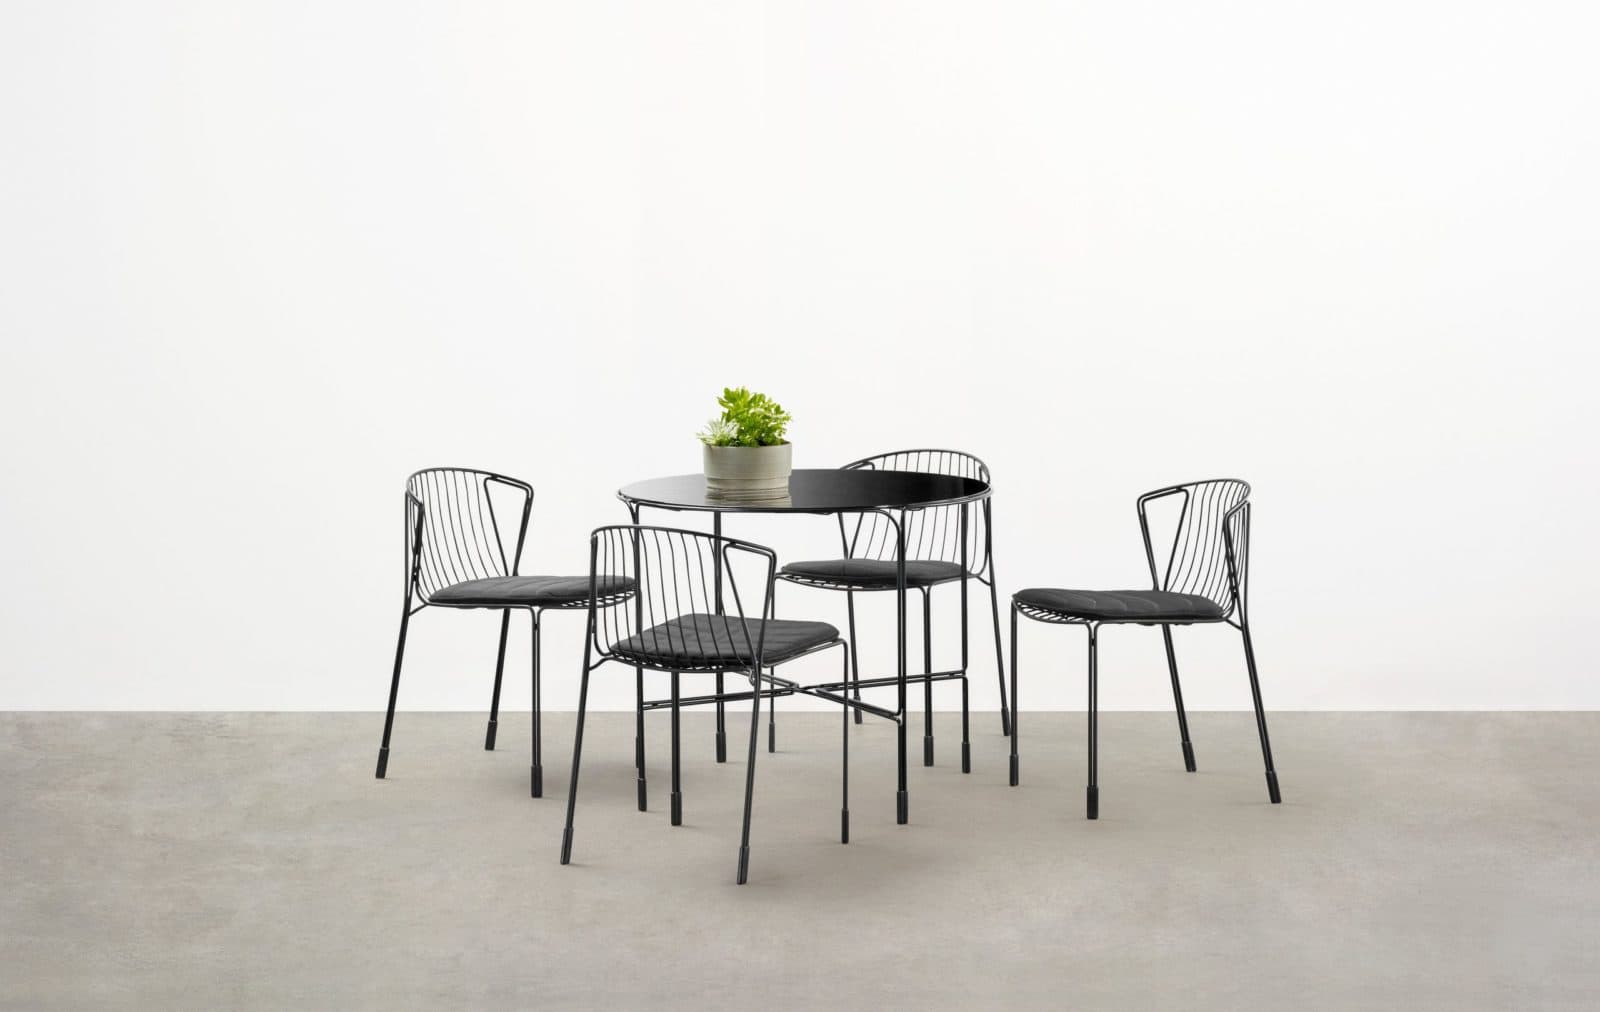 Tidal Dining Chair | Elegant Outdoor Dining Chair | Made by Tait.